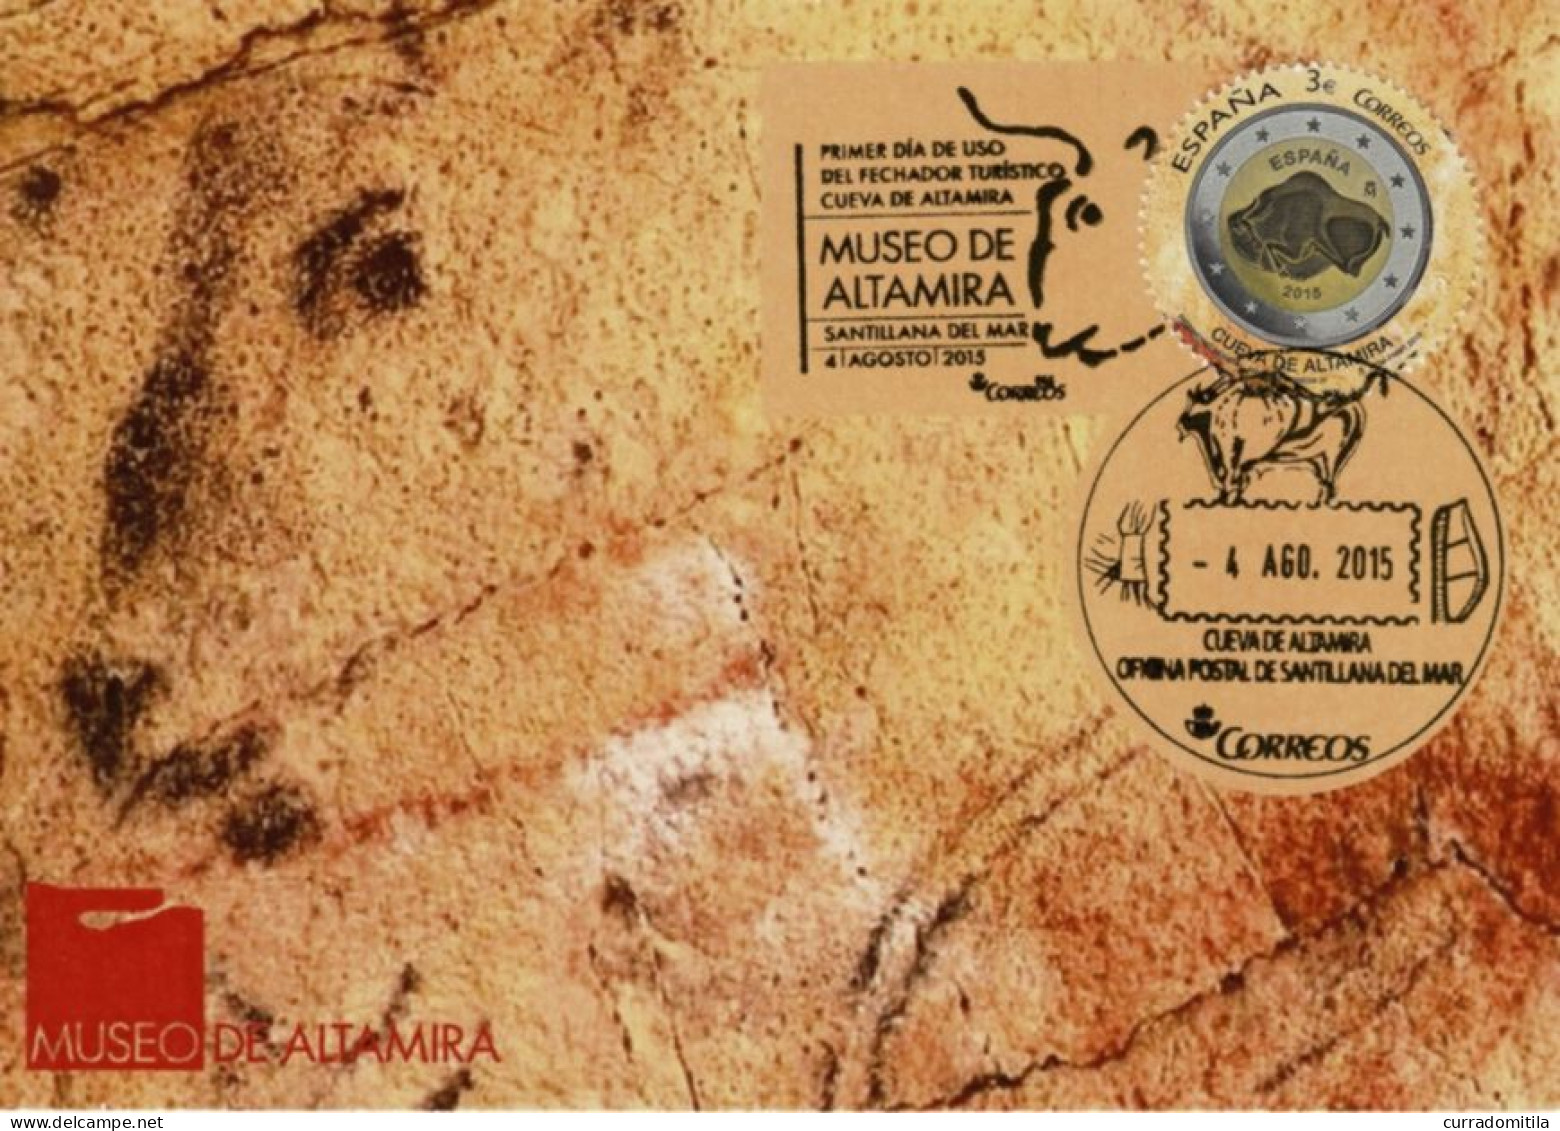 2015 Card (Large) With Rock Art Cancellations, Prehistoric Bison Of Altamita And Special Stamp Of Altamira - Archeologia